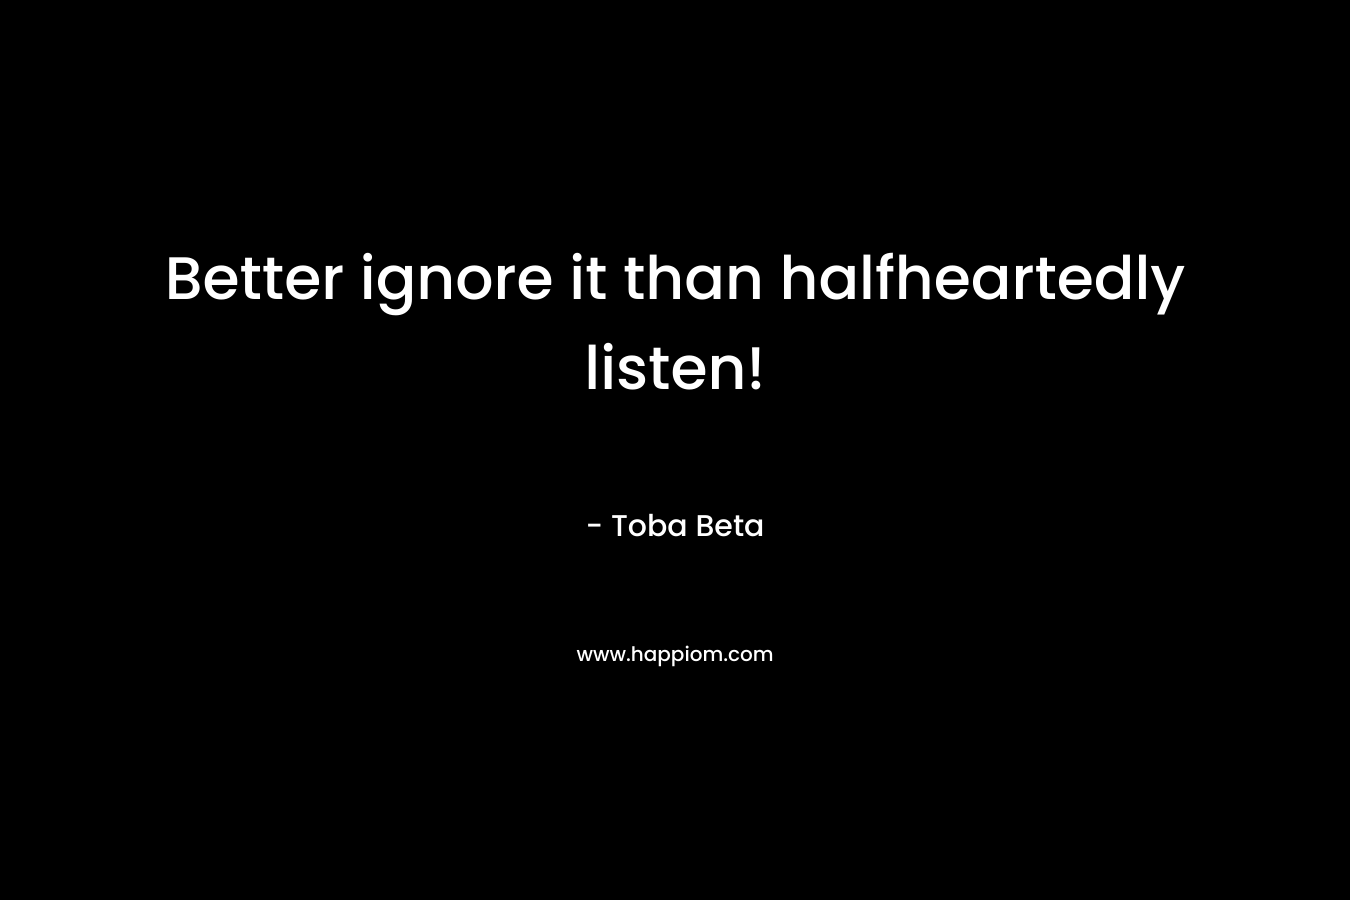 Better ignore it than halfheartedly listen!